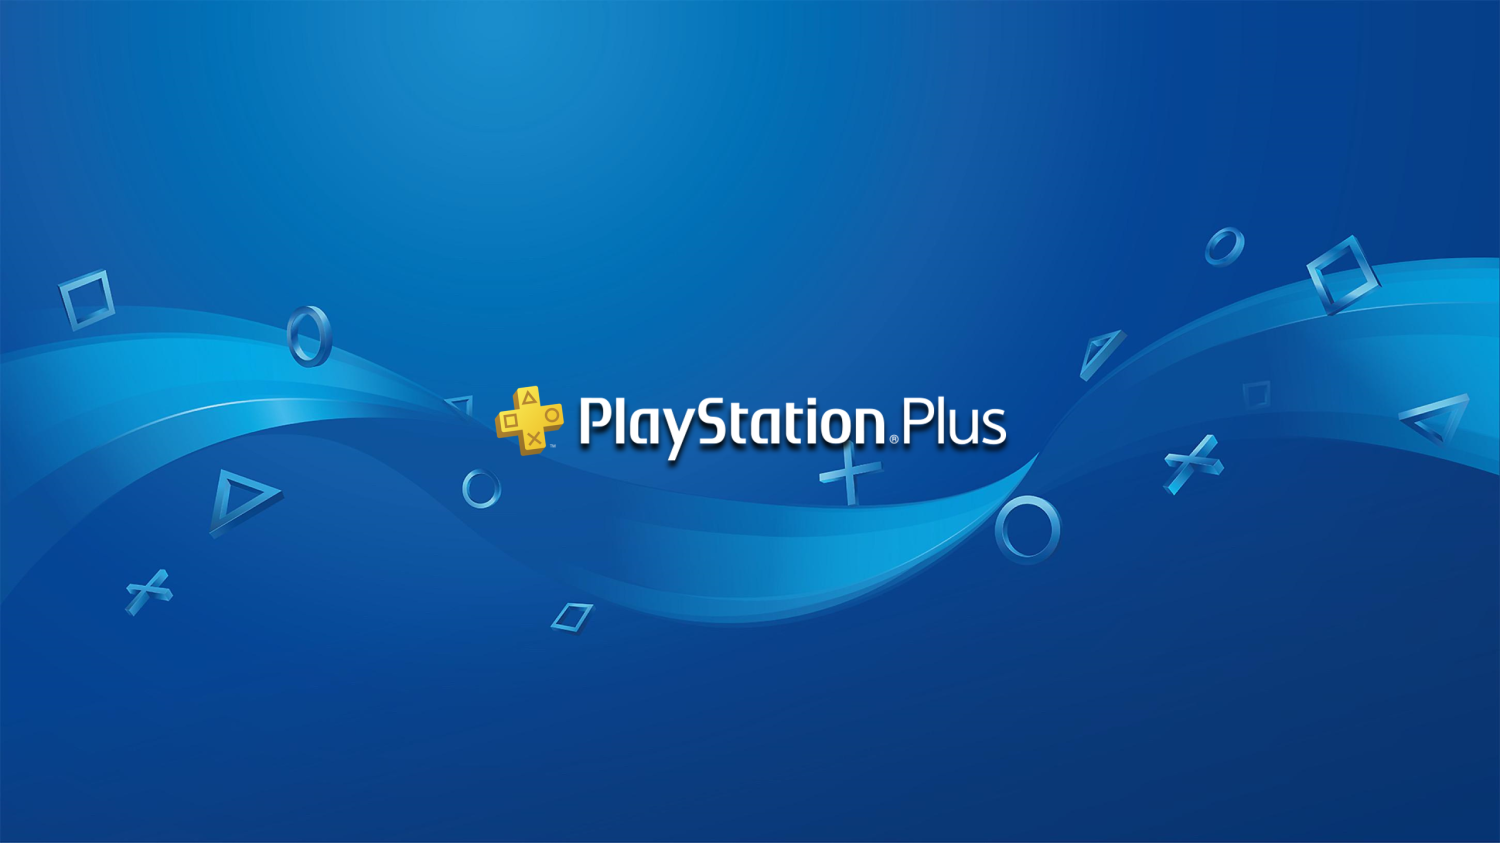 Mbon just got added as free game for members of Ps plus tiers